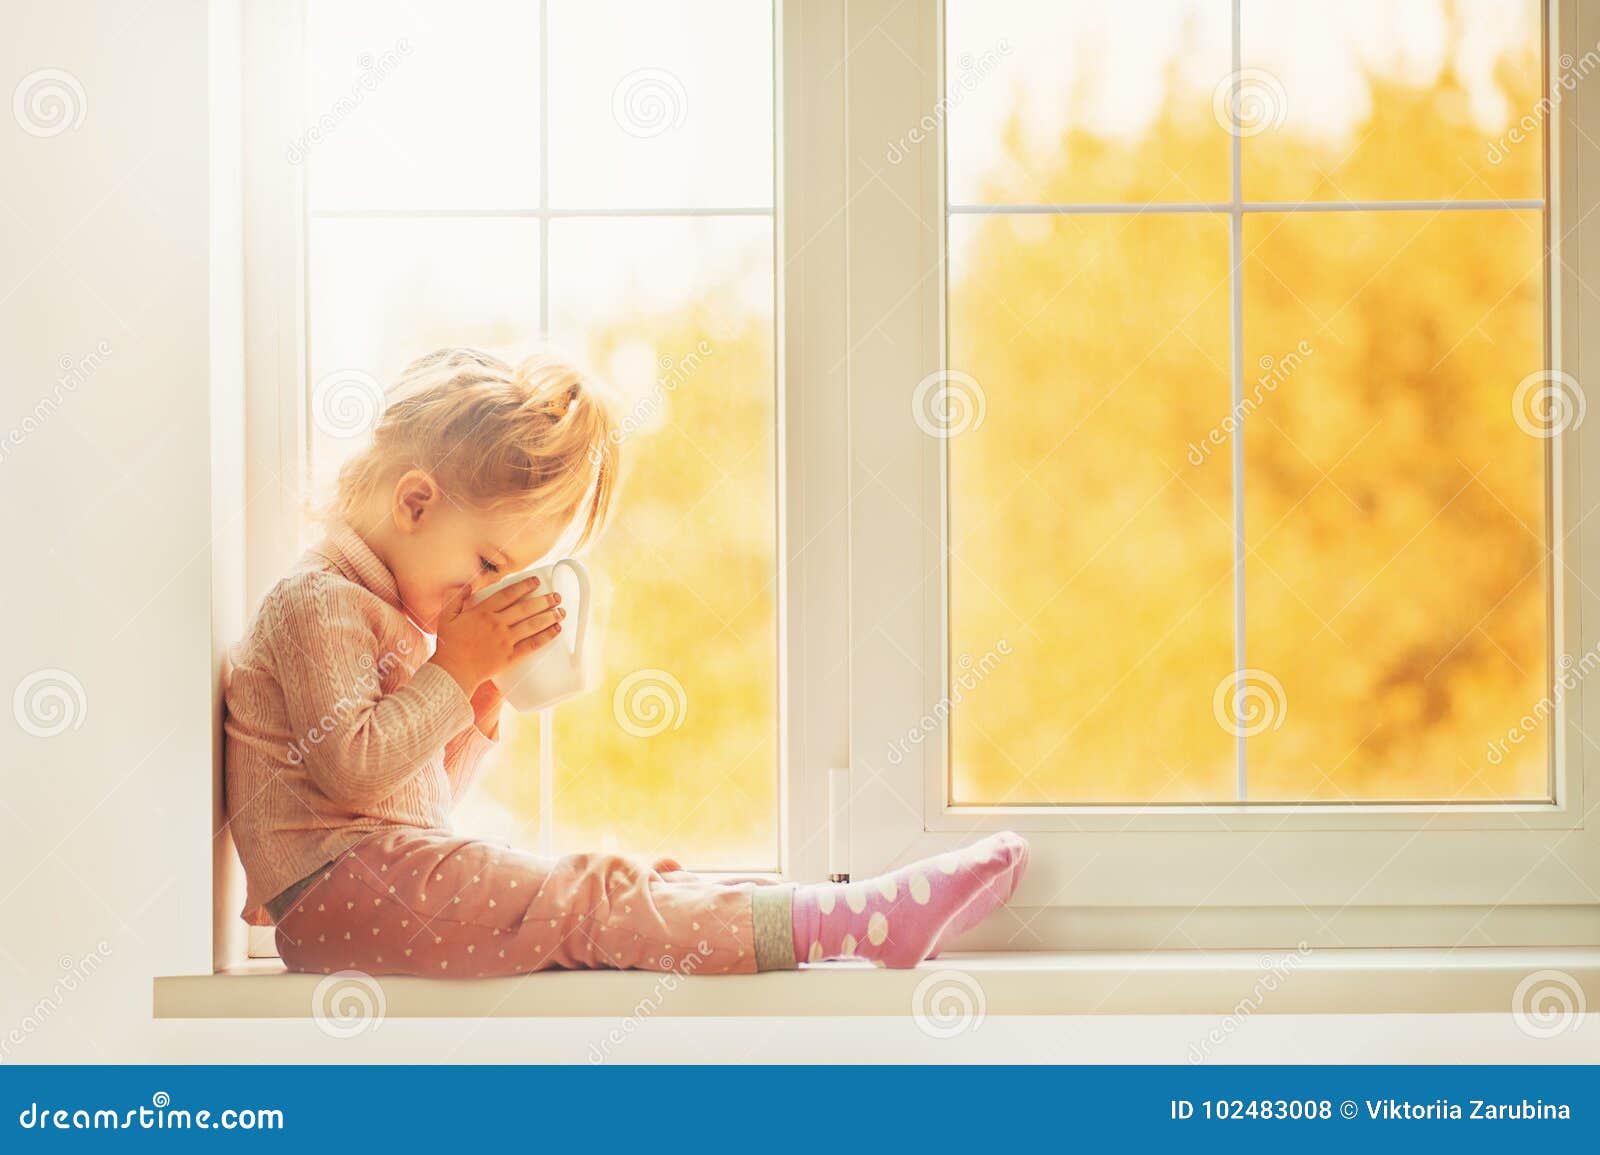 little cute kid girl sitting by window indoor holding cup of hot drink cocoa enjoying autumn forest background. season beauty